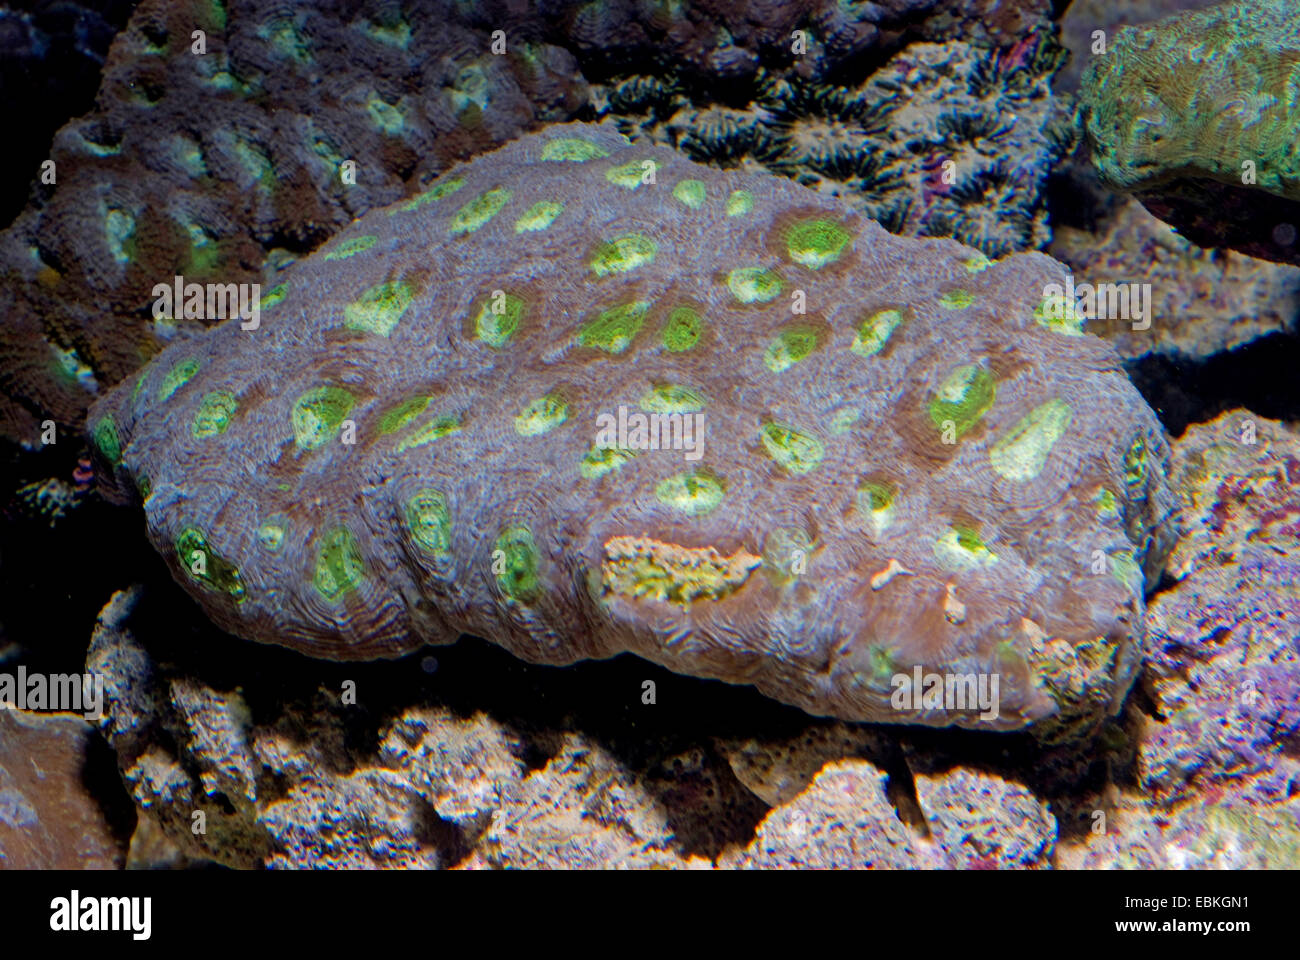 Stony coral (Acanthastrea spec.), close-up view Stock Photo